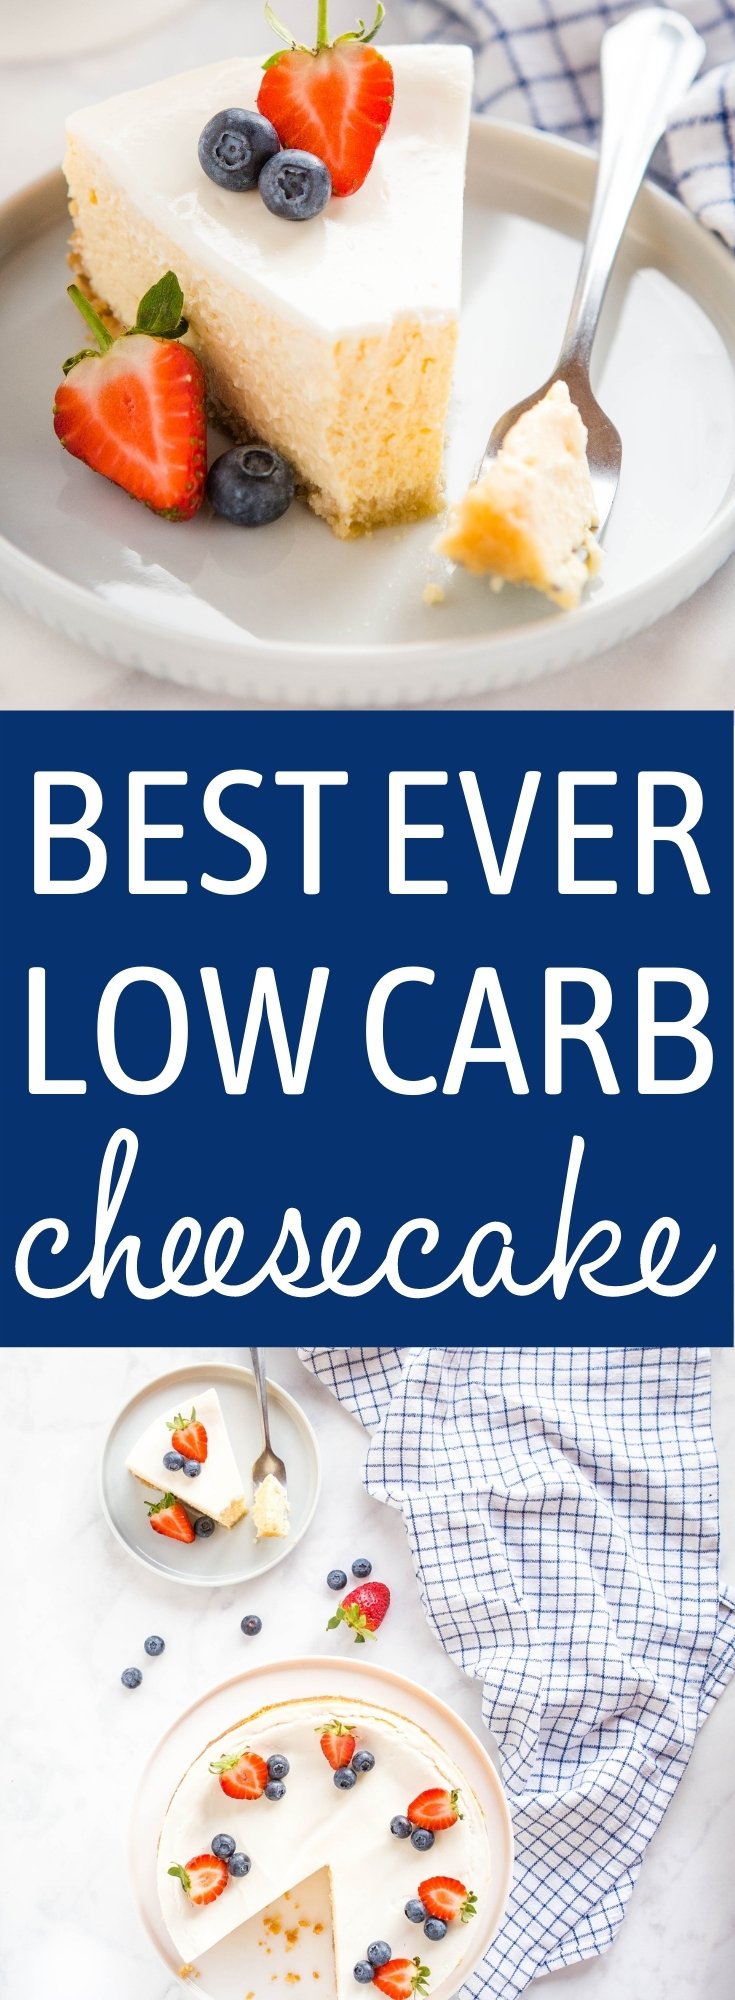 Best Ever Low Carb Cheesecake Pinterest Recipe